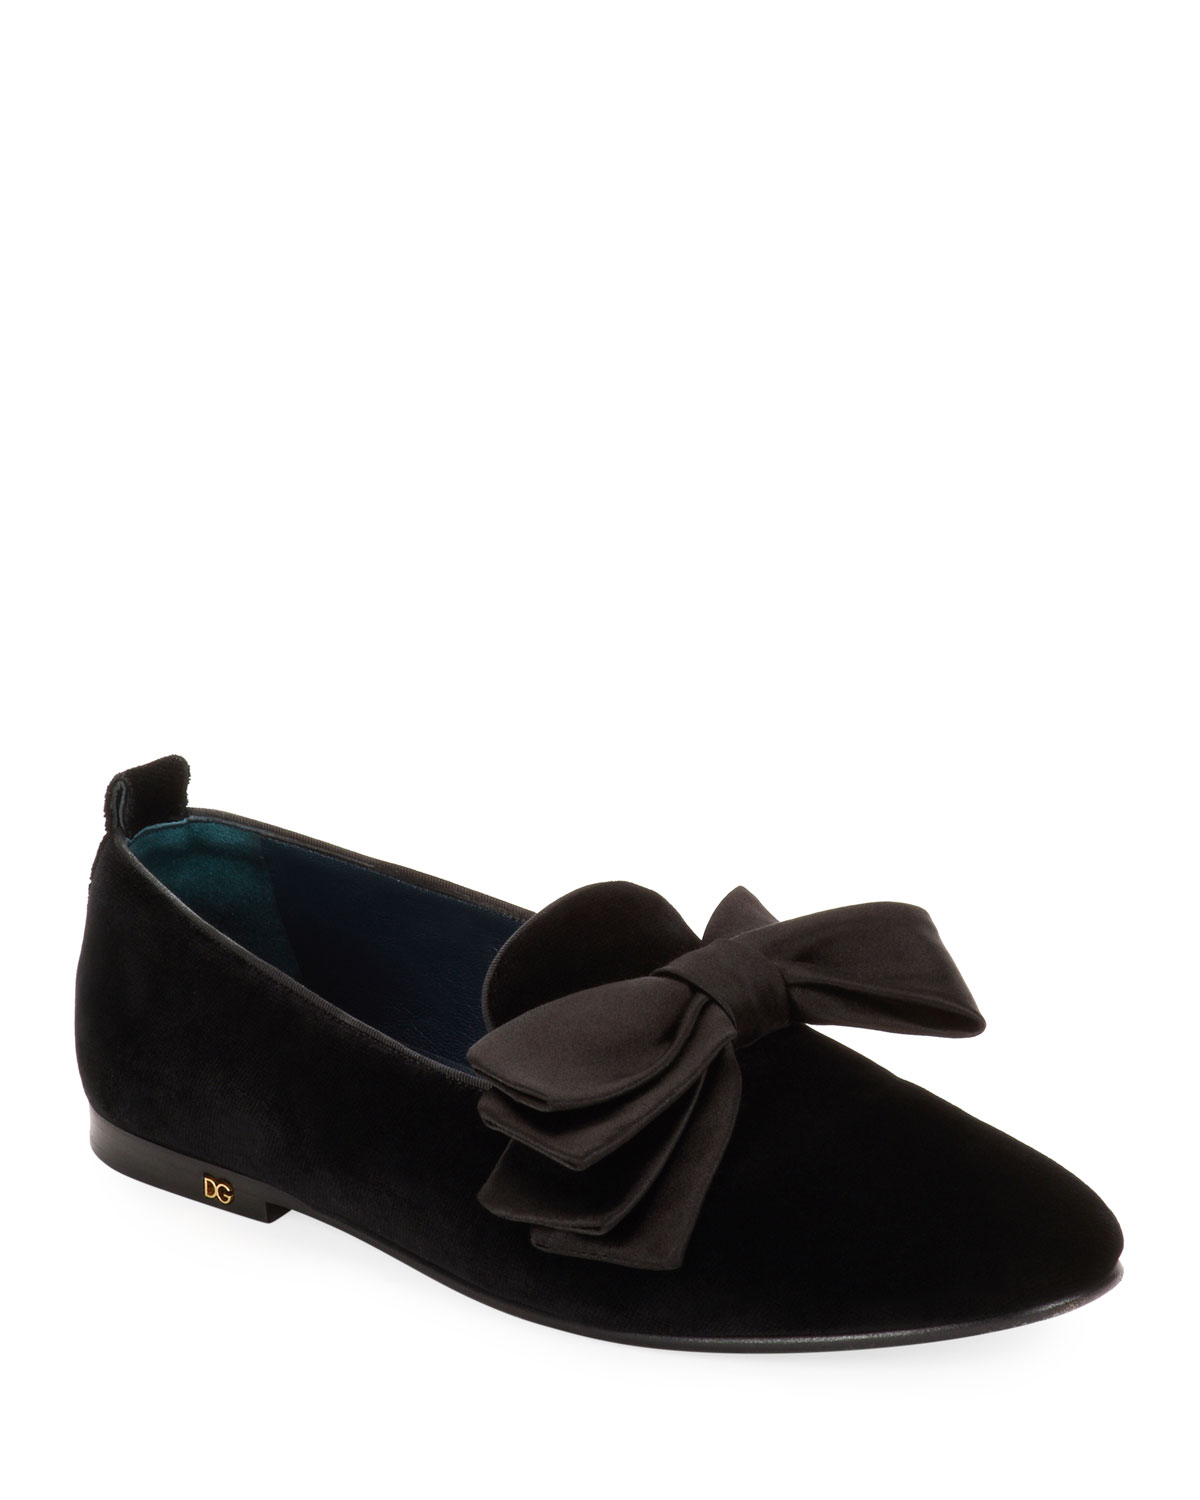 Dolce & Gabbana Men's Velvet Loafers with Bow – All Travel Essentials